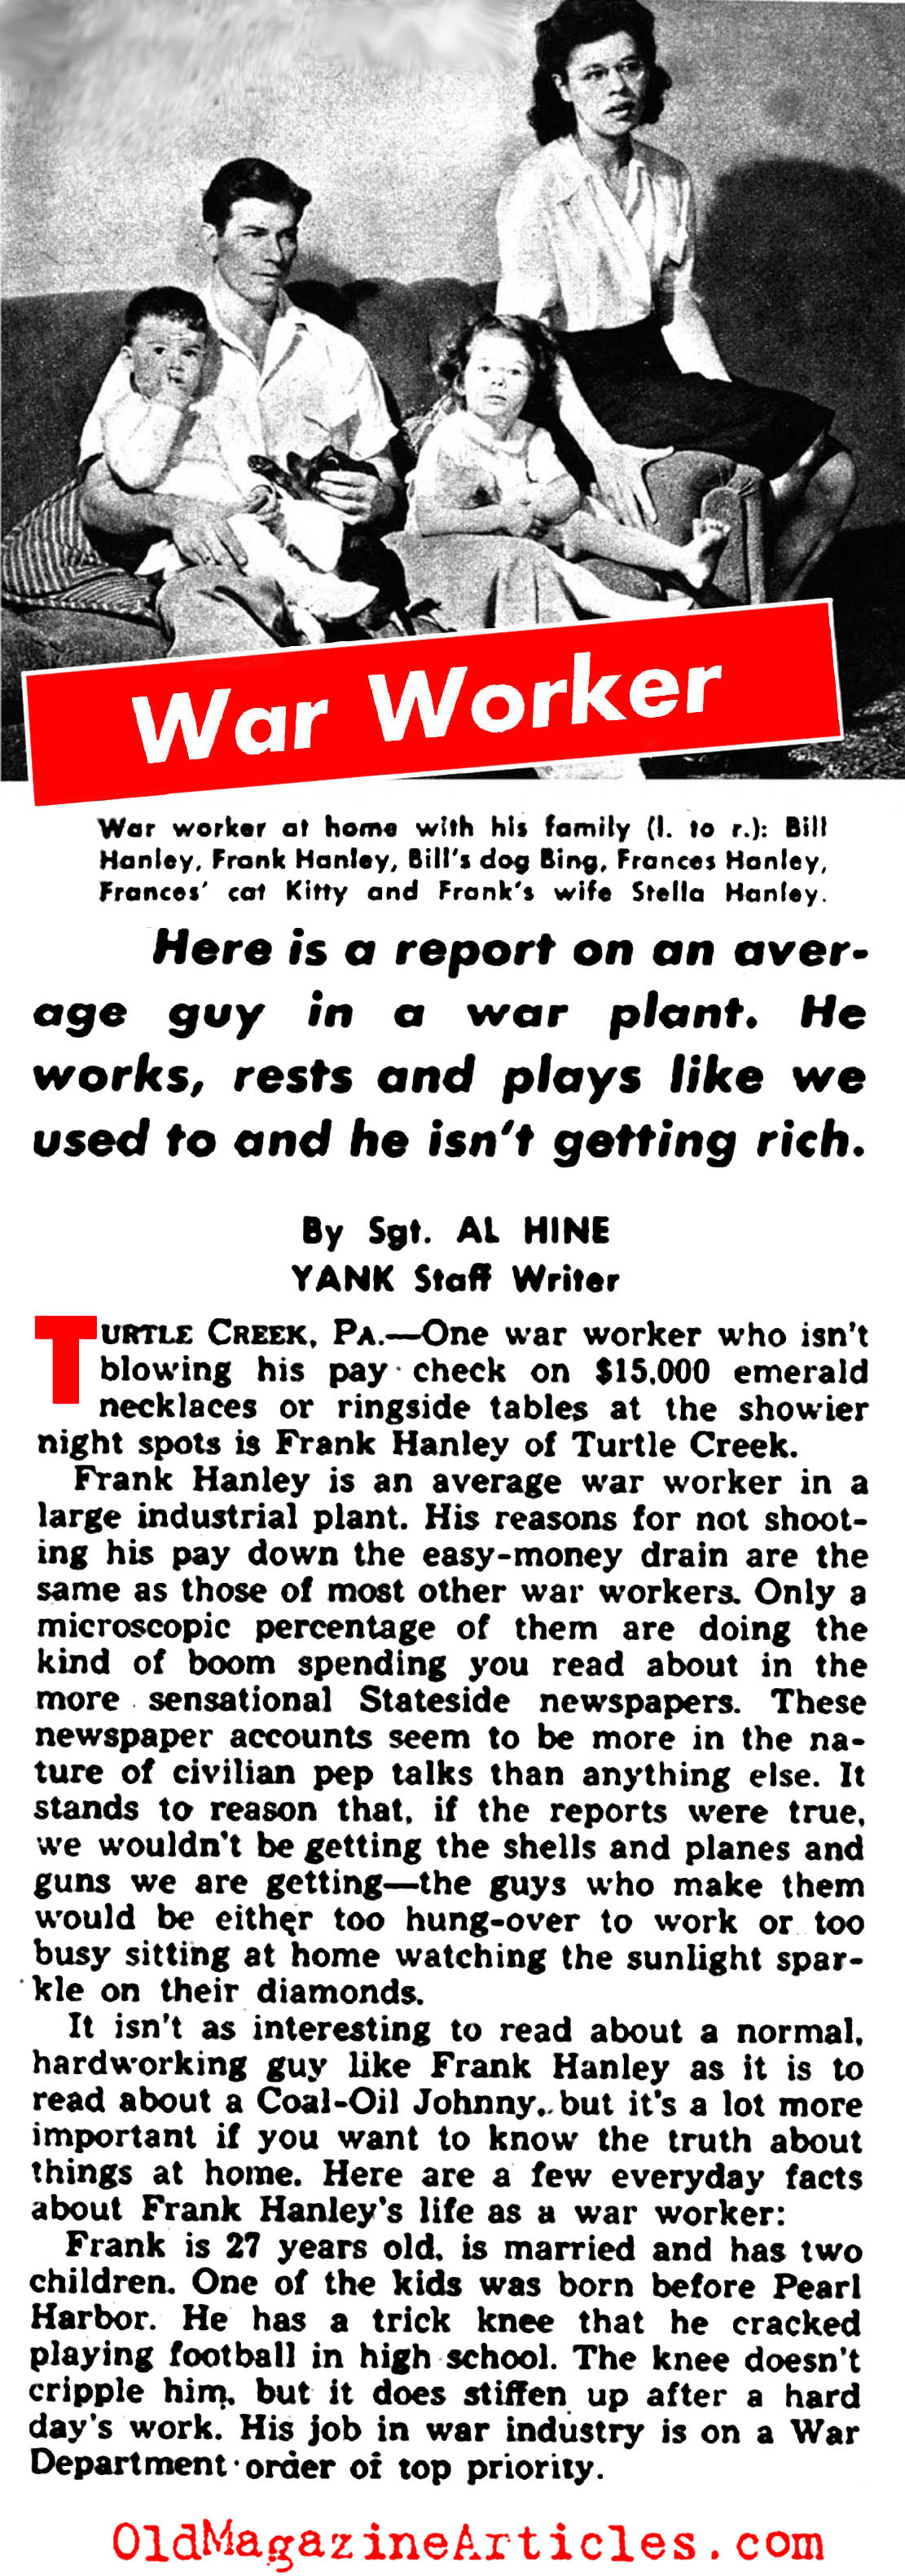 Interview with a Home Front War Worker (Yank Magazine, 1944)